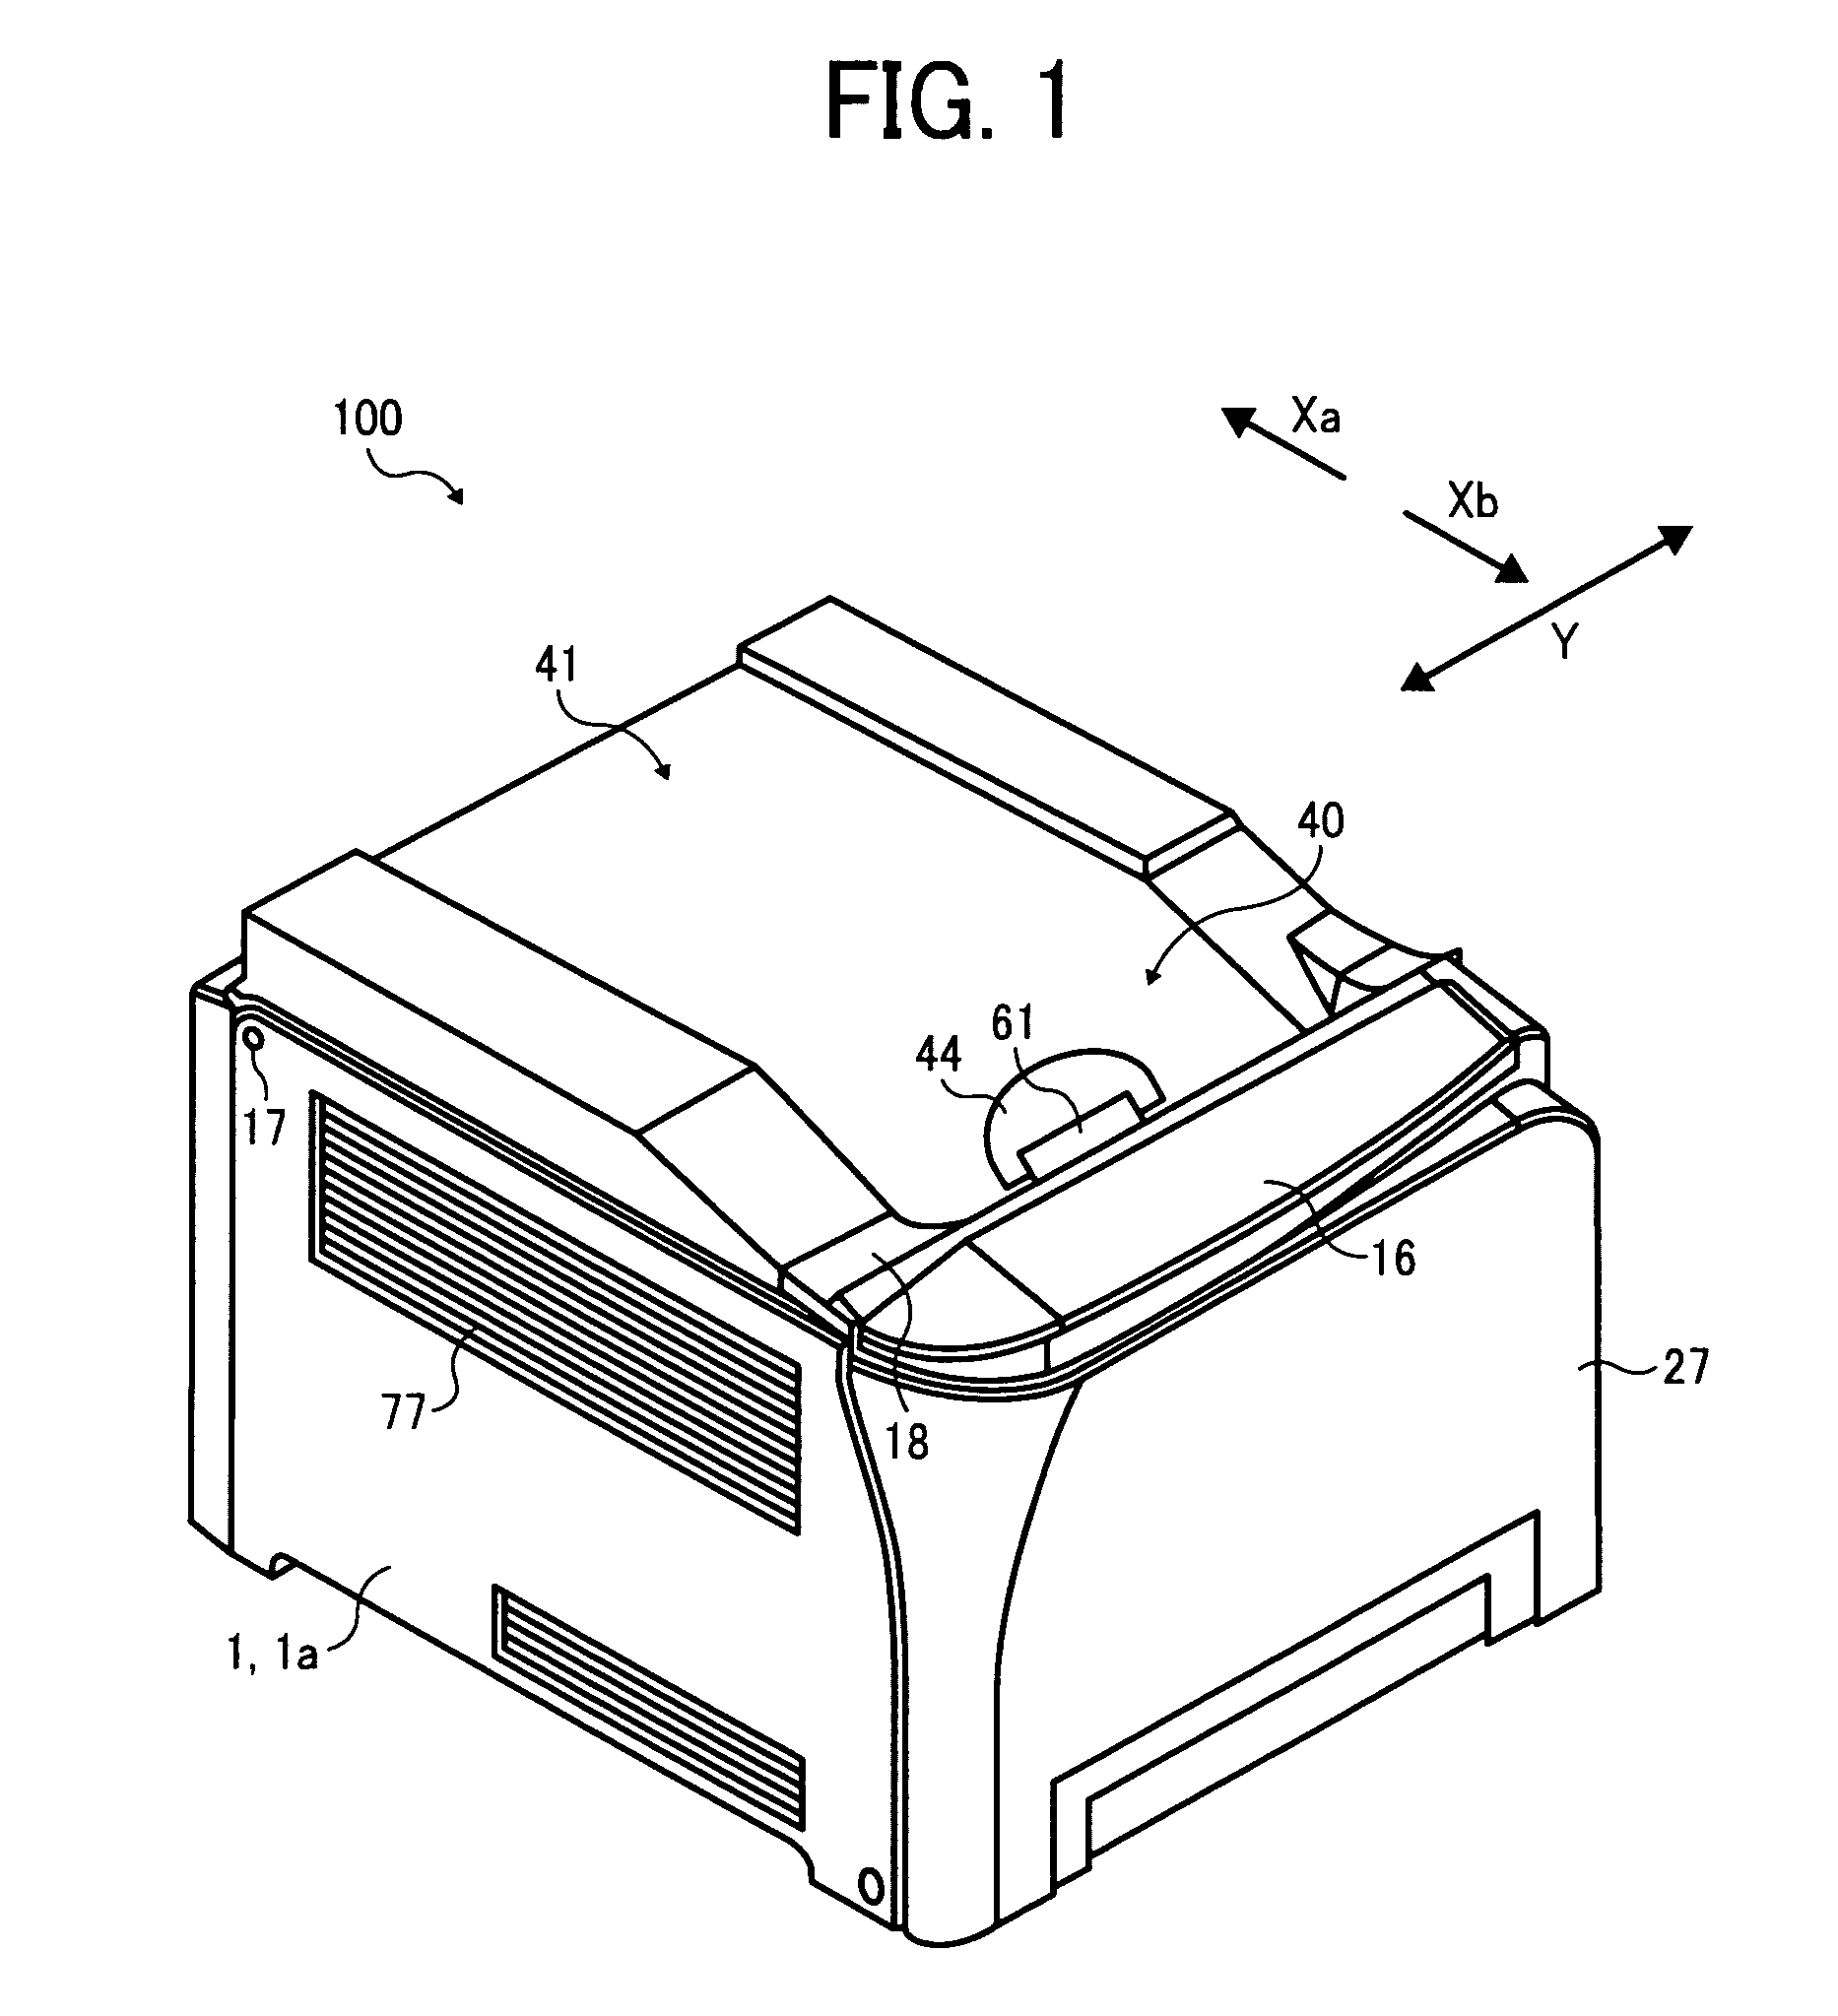 Image forming apparatus including a collecting portion inside guide members to collect and store liquid droplets